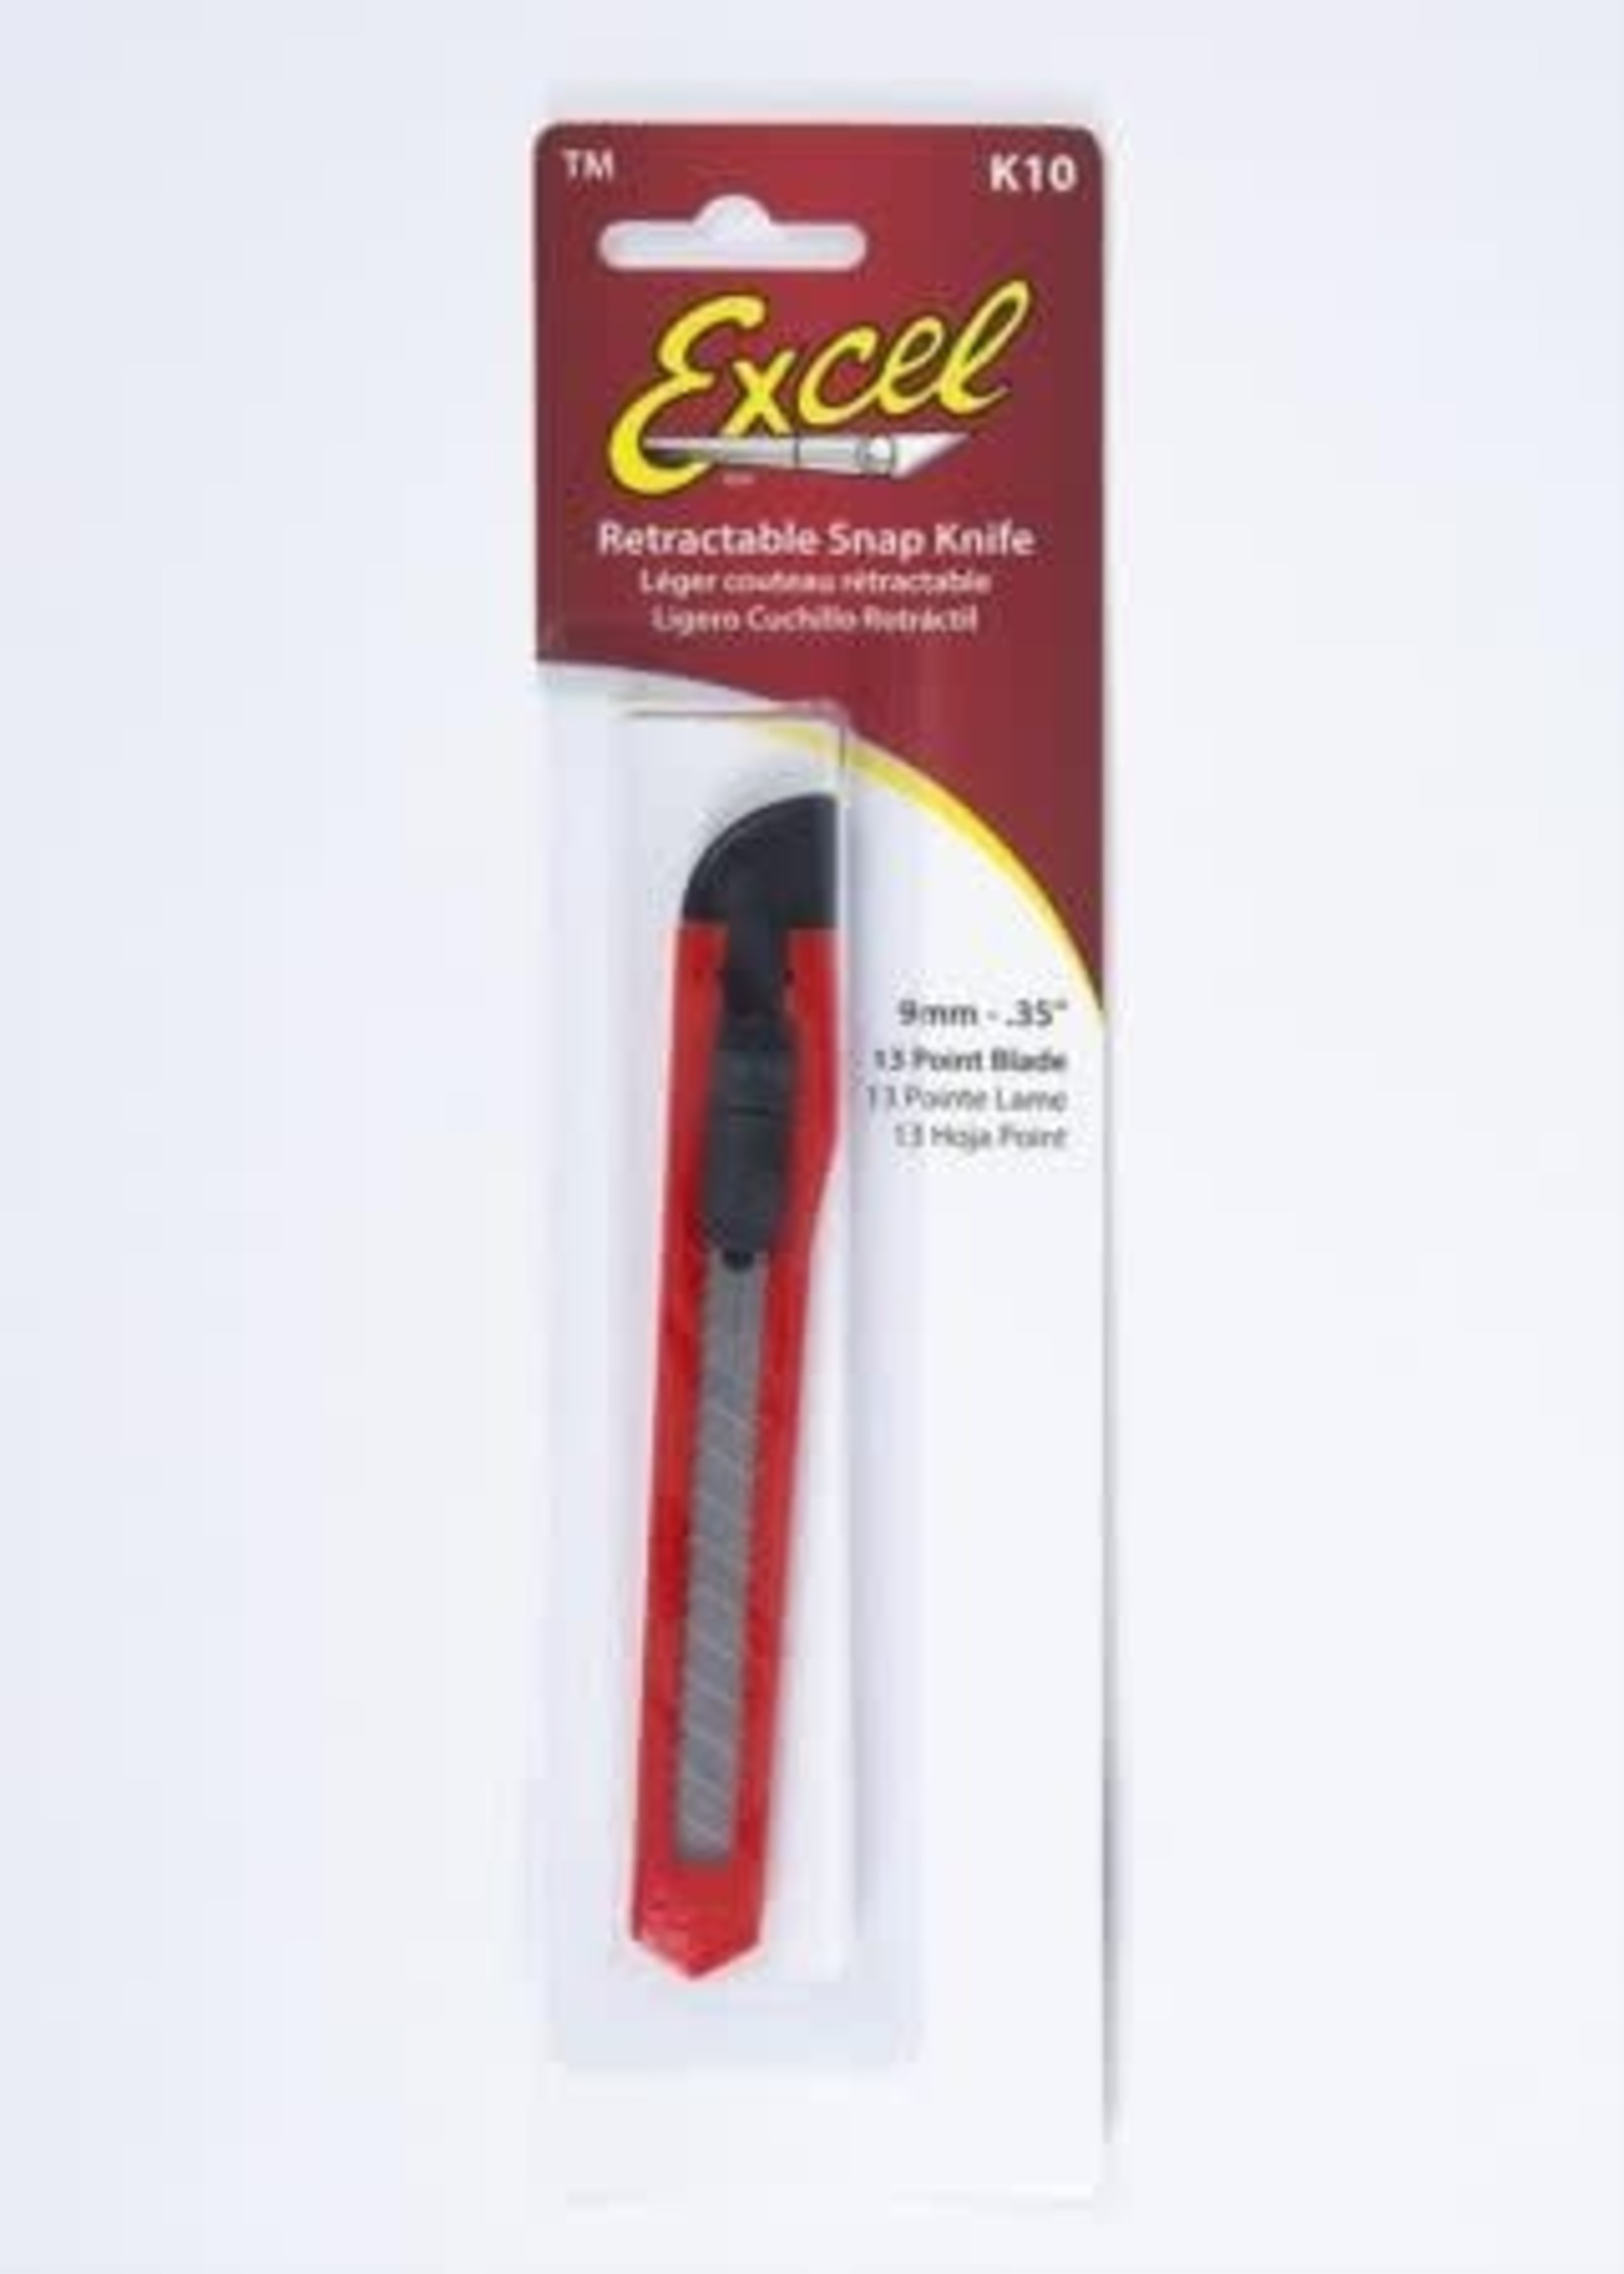 Excel Retractable snap knife - for plastic